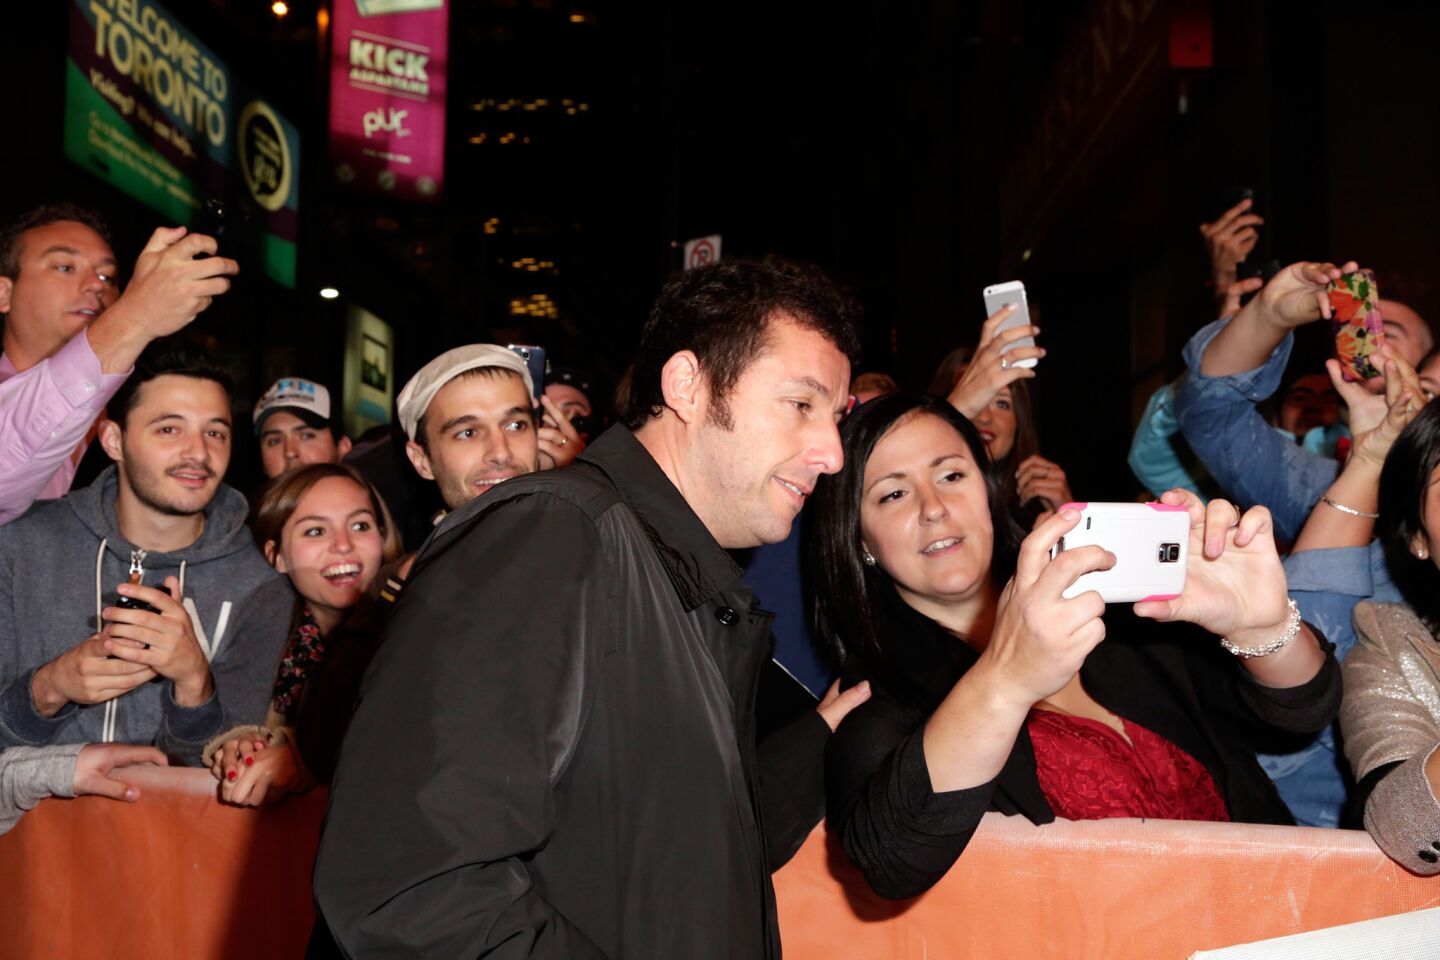 Actor and producer Adam Sandler lets a fan take a photo during "The Cobbler" premiere at the 2014 Toronto International Film Festival on Sept. 11.